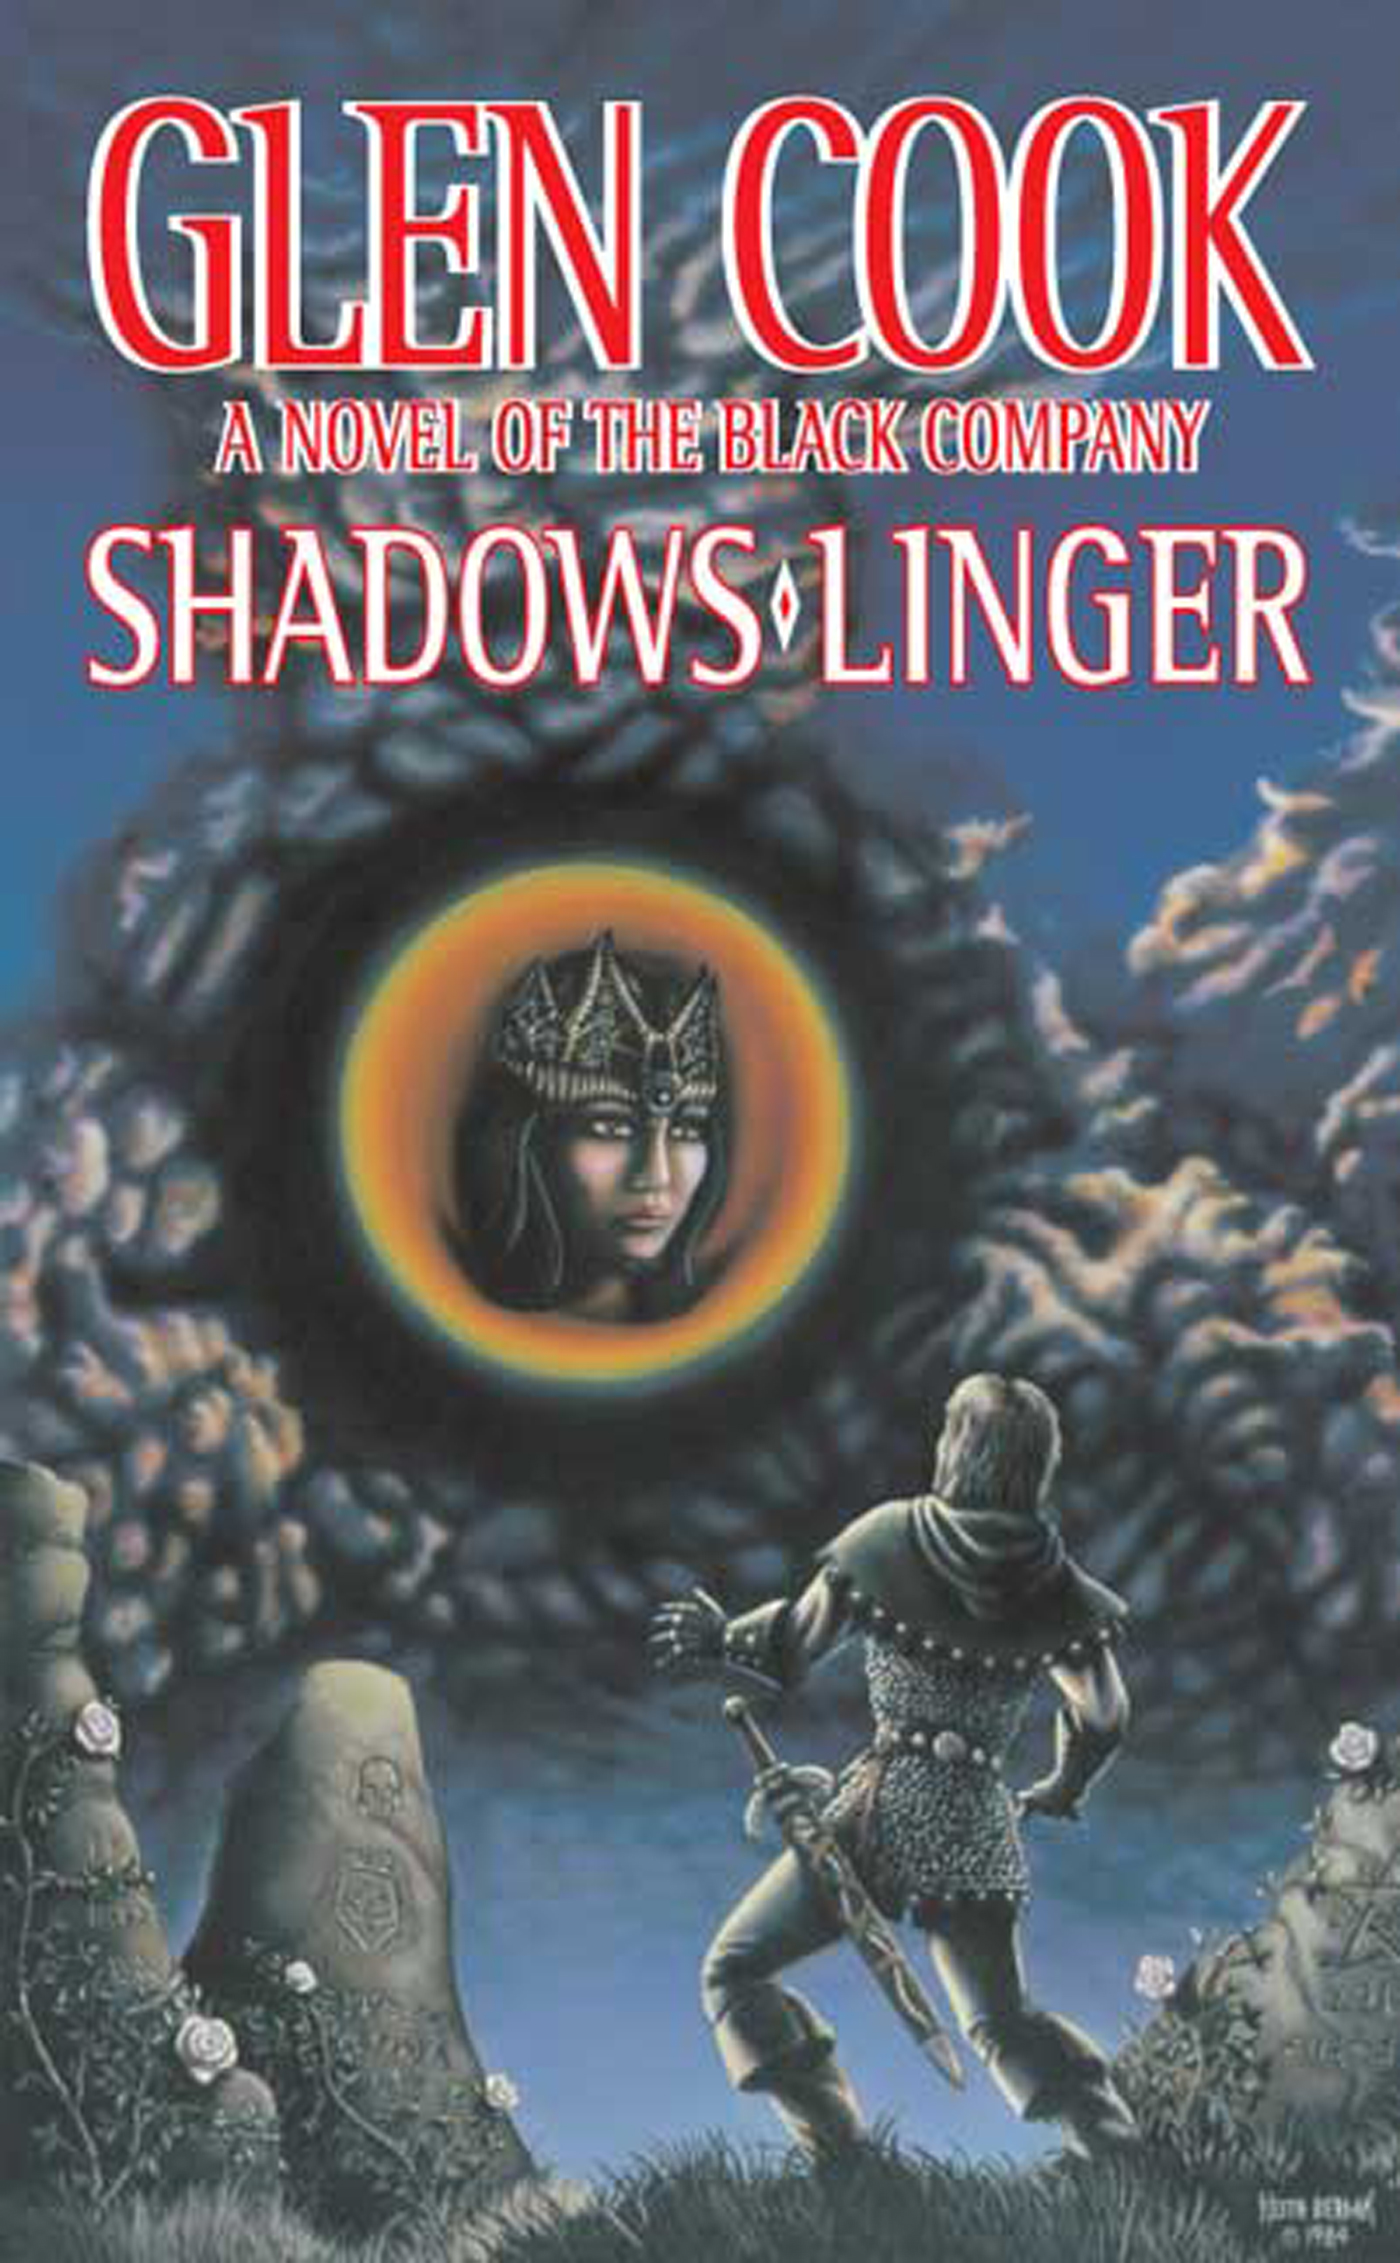 Shadows Linger : A Novel of the Black Company by Glen Cook